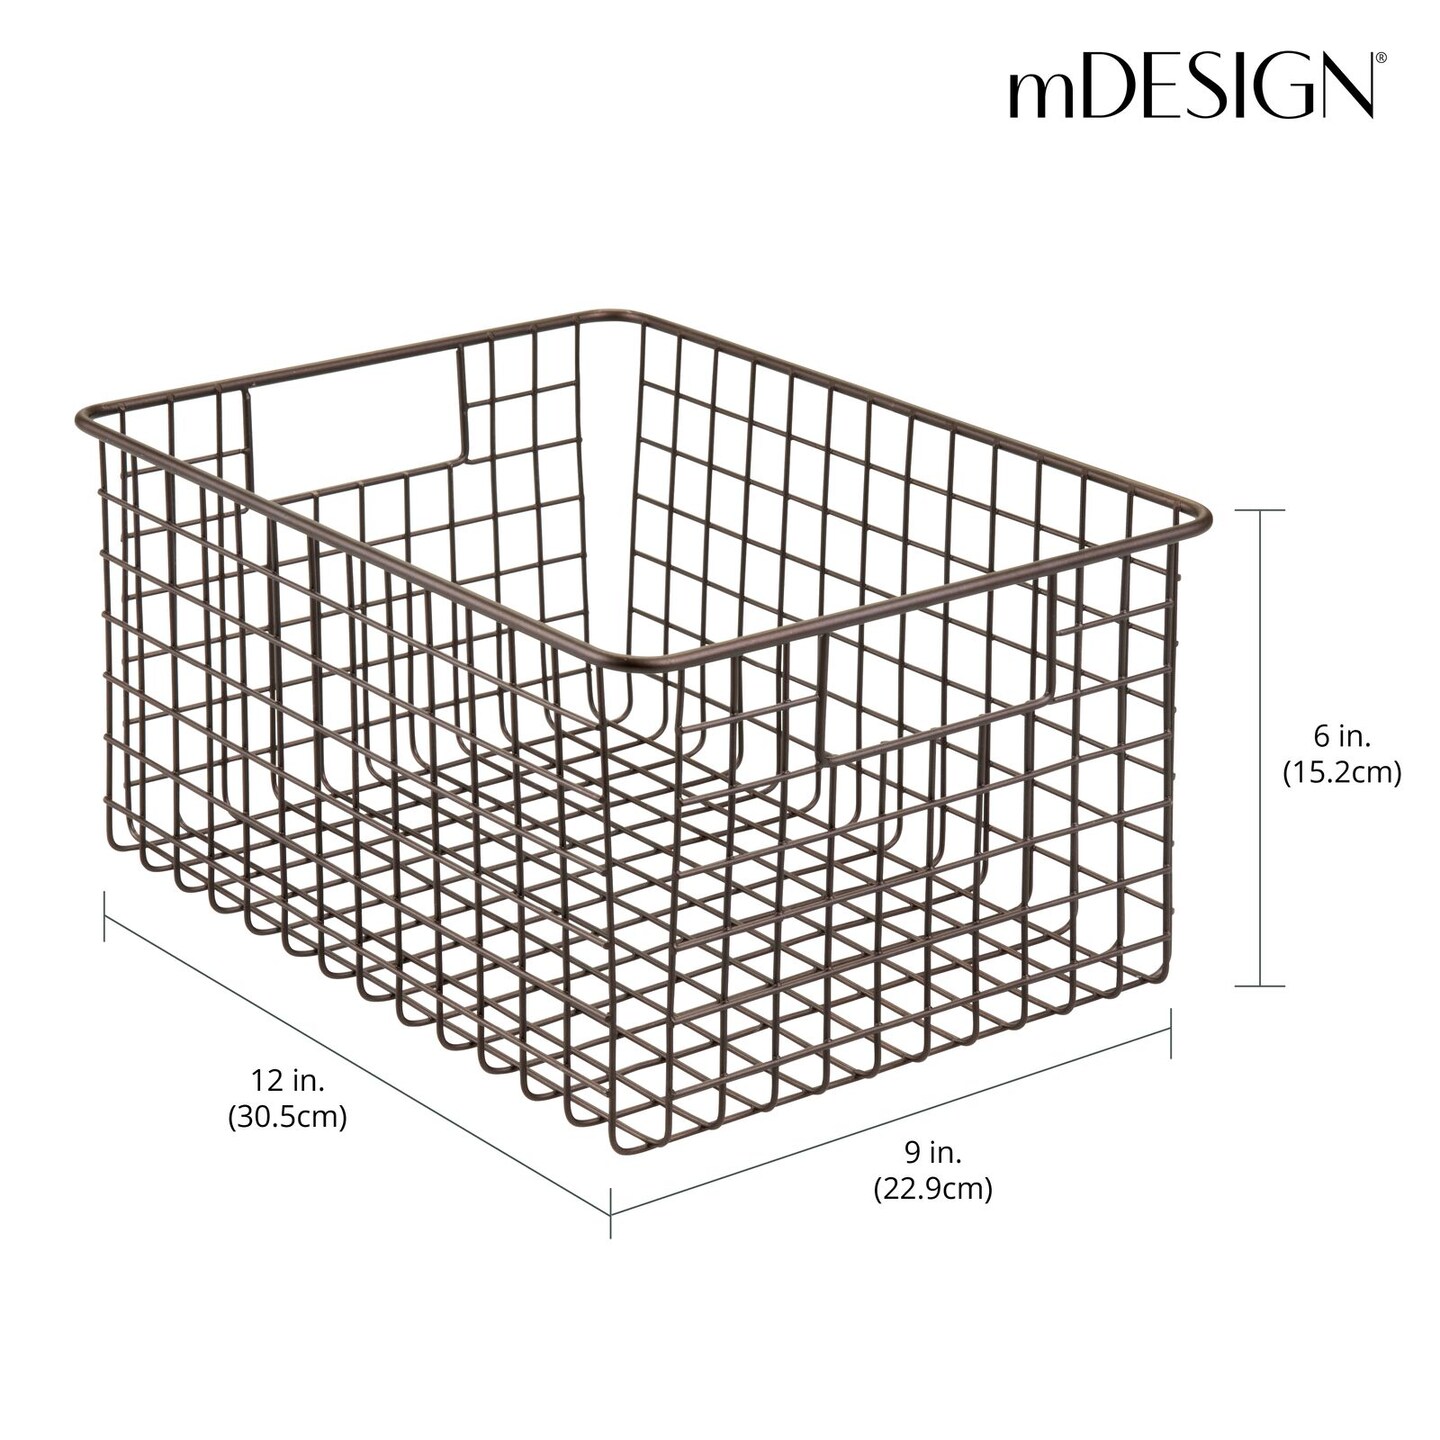 mDesign Metal Wire Food Organizer Basket with Built-In Handles - 12 x 9 x 6